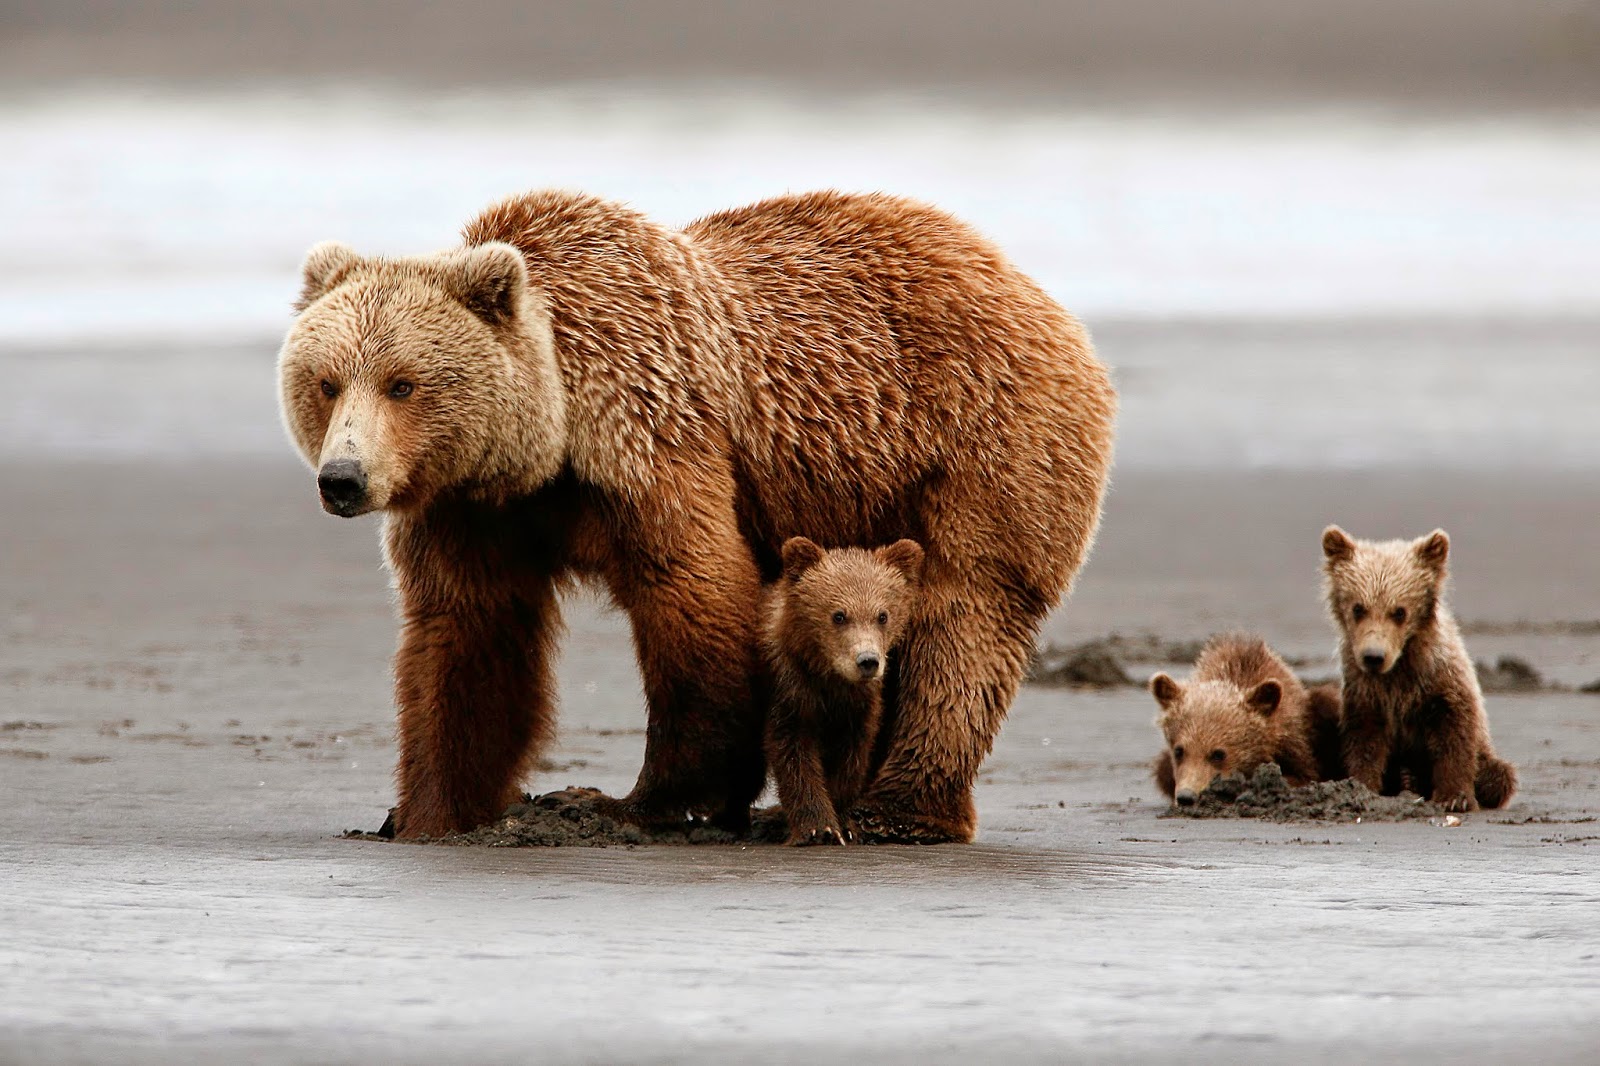 papier peint ours,ours brun,grizzly,ours,animal terrestre,ours kodiak